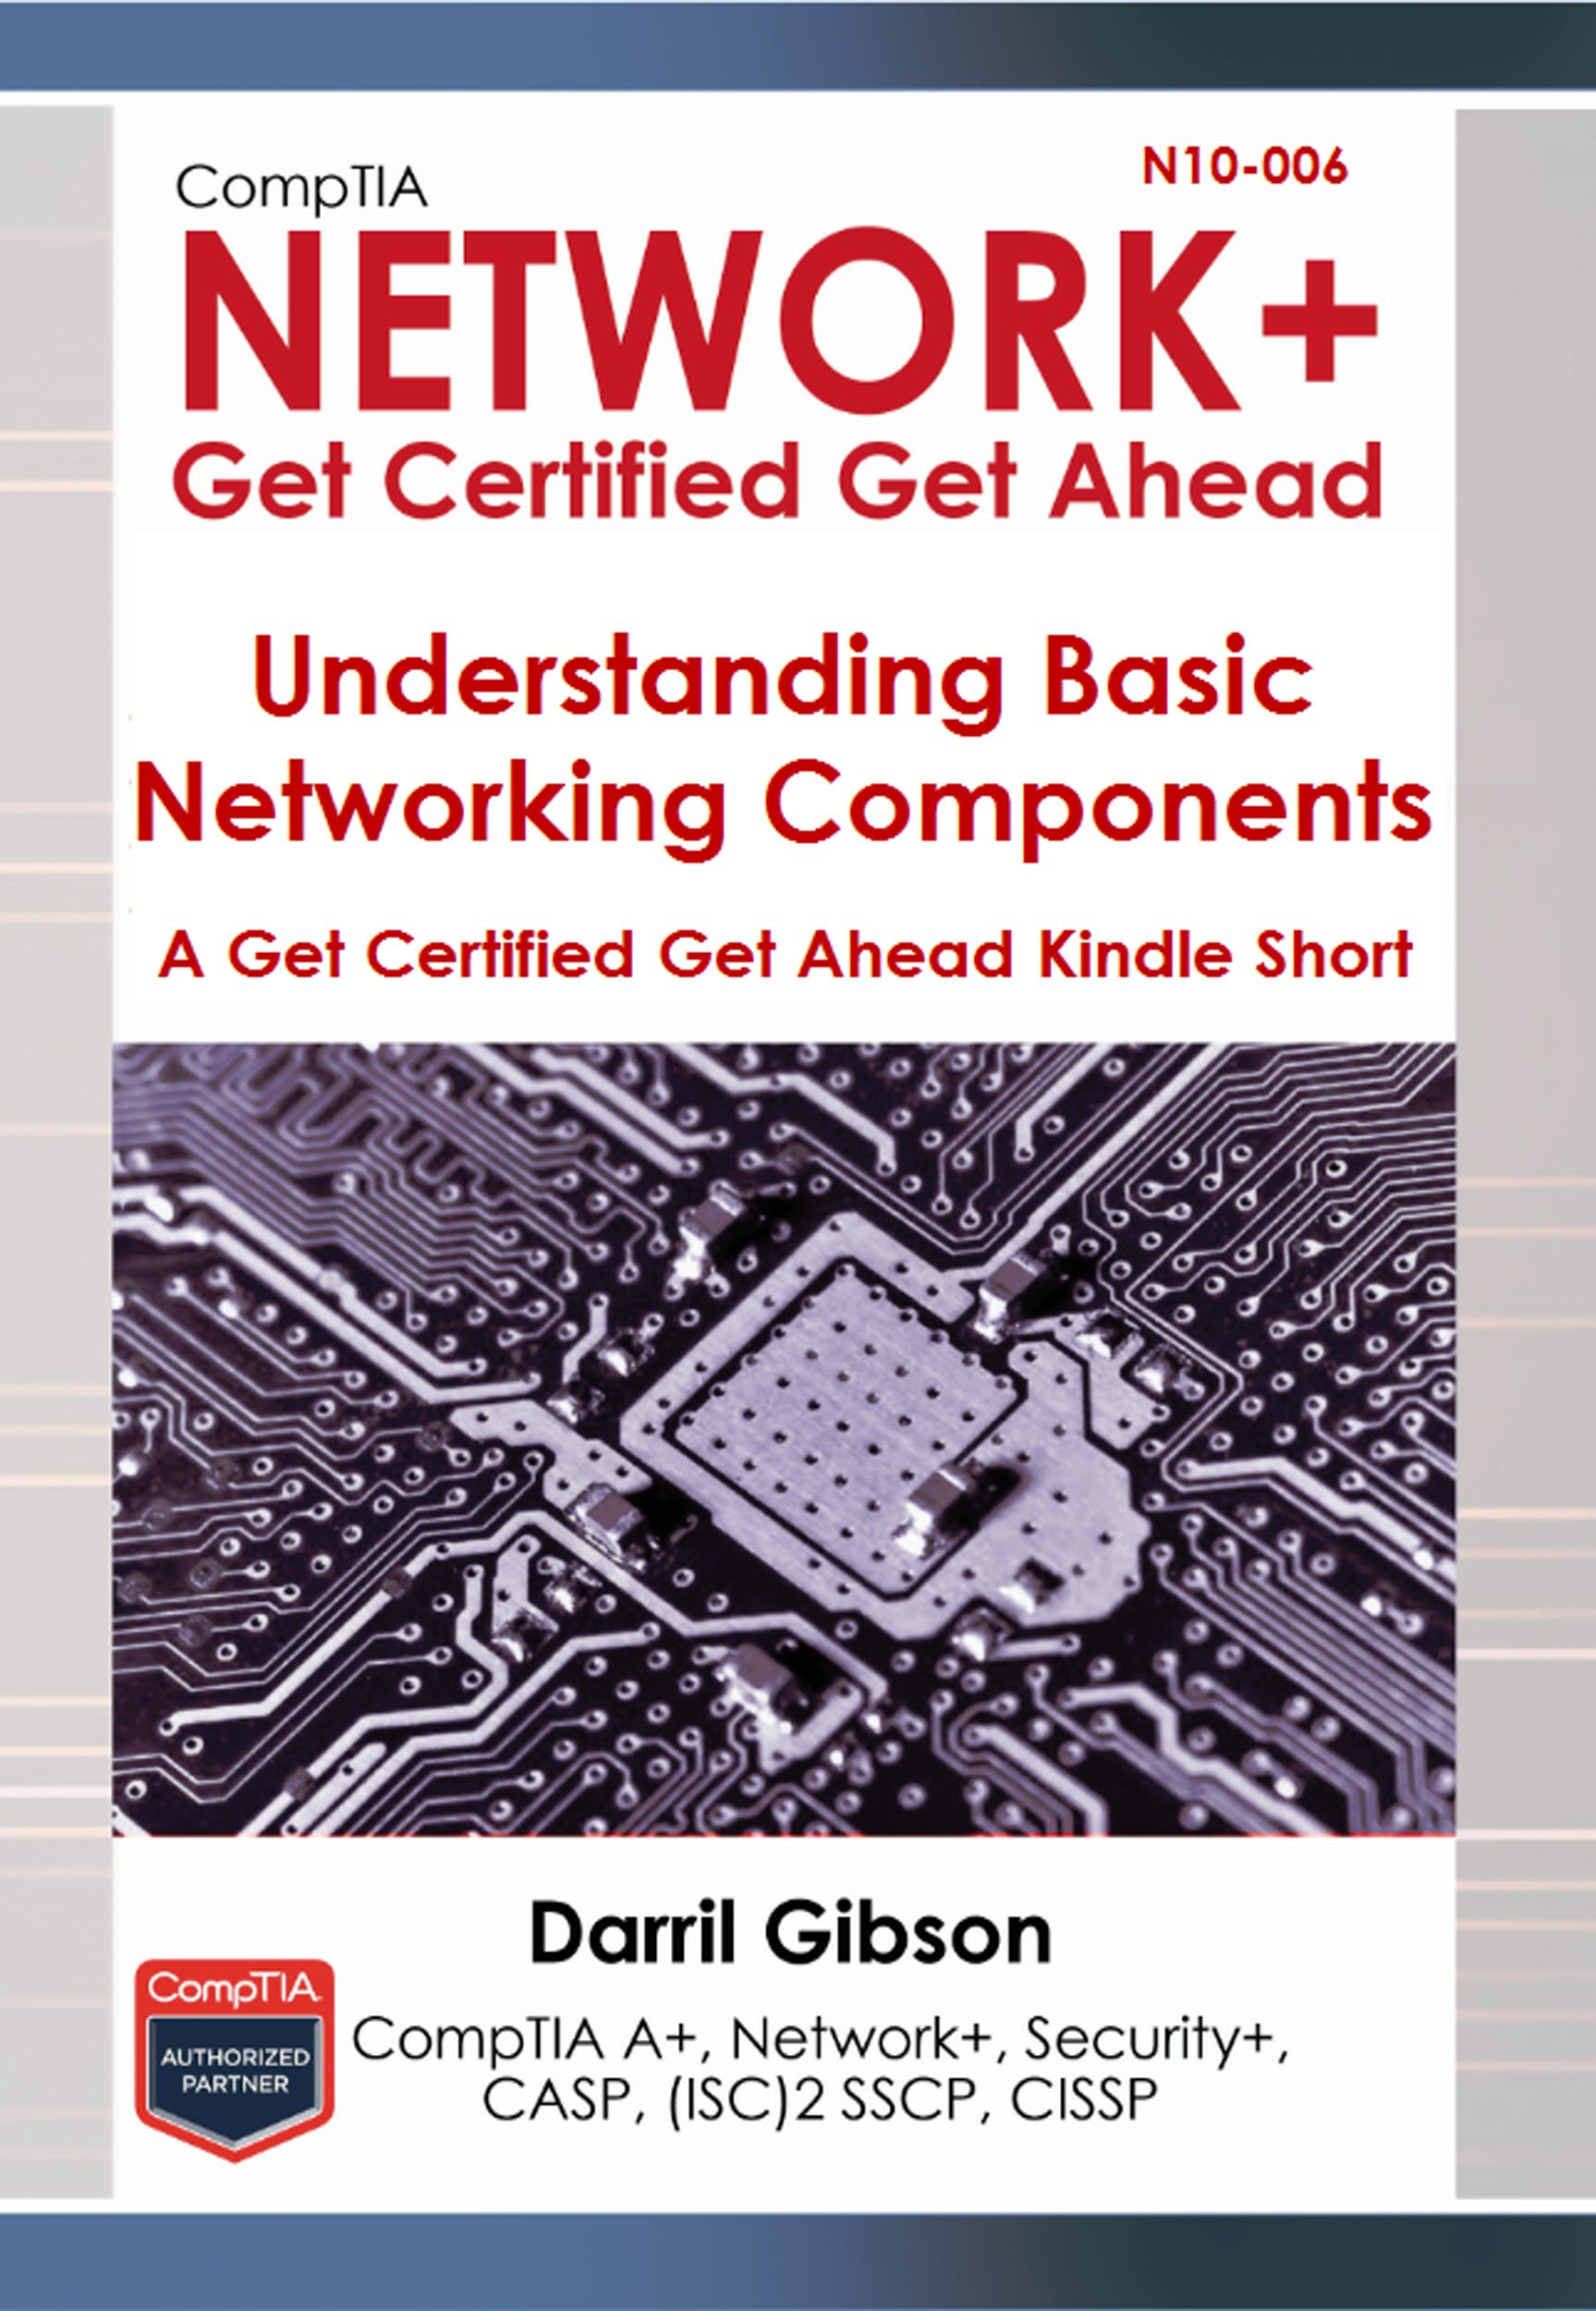 CompTIA N10-006 Network+ Basic Networking Components (A Get Certified Get Ahead Network+ Kindle Short Book 1)